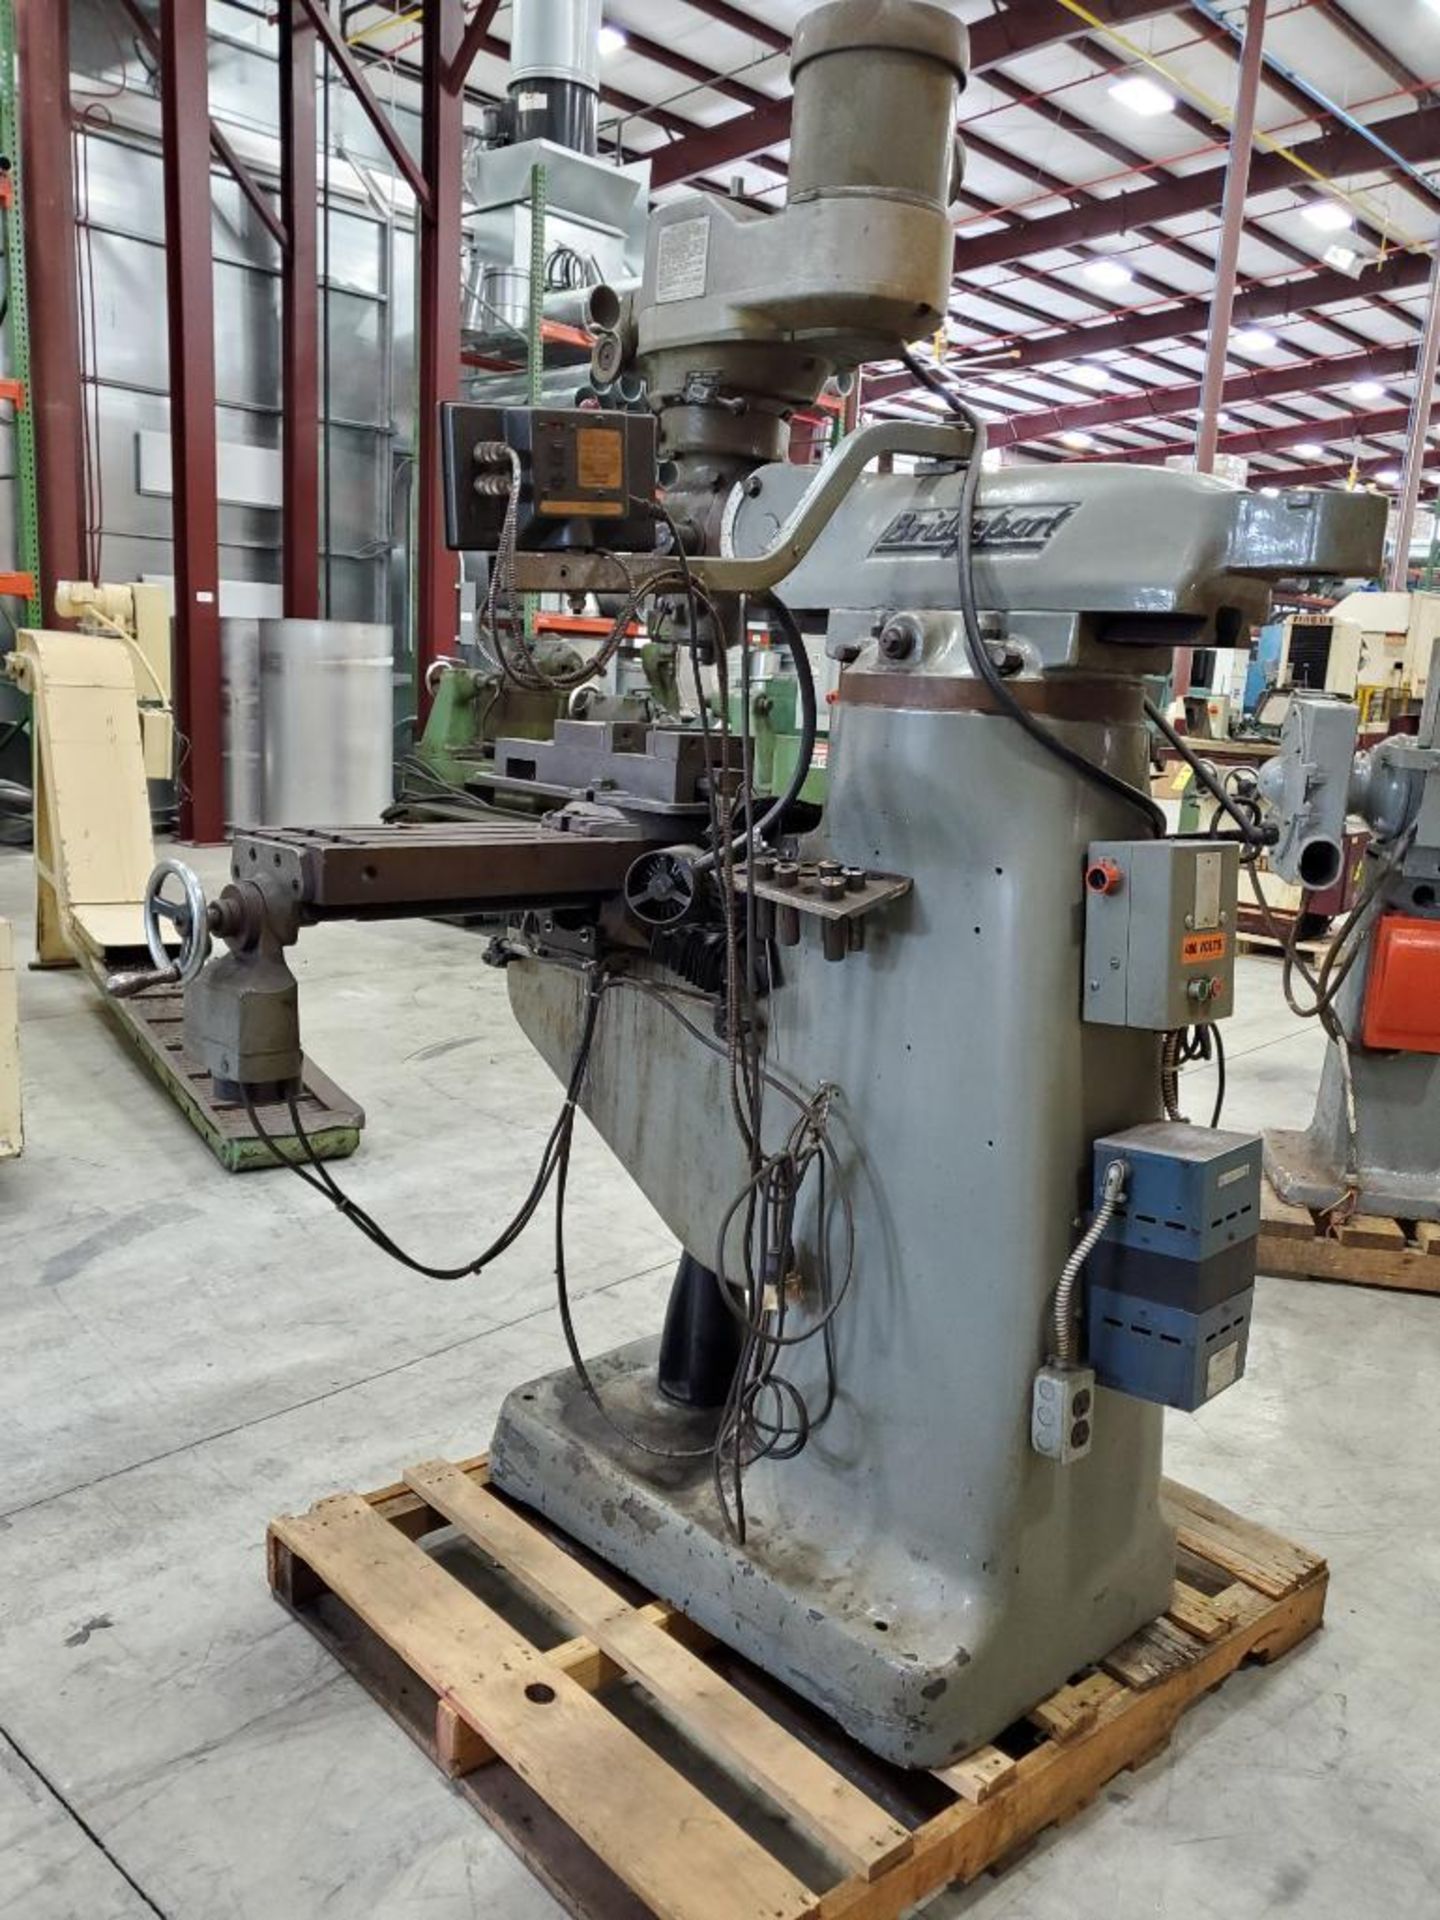 Bridgeport Vertical Milling Machine, 48" x 9" Table, Newall Topaz 2-Axis DRO Control, 6" Rotary Mach - Image 11 of 13